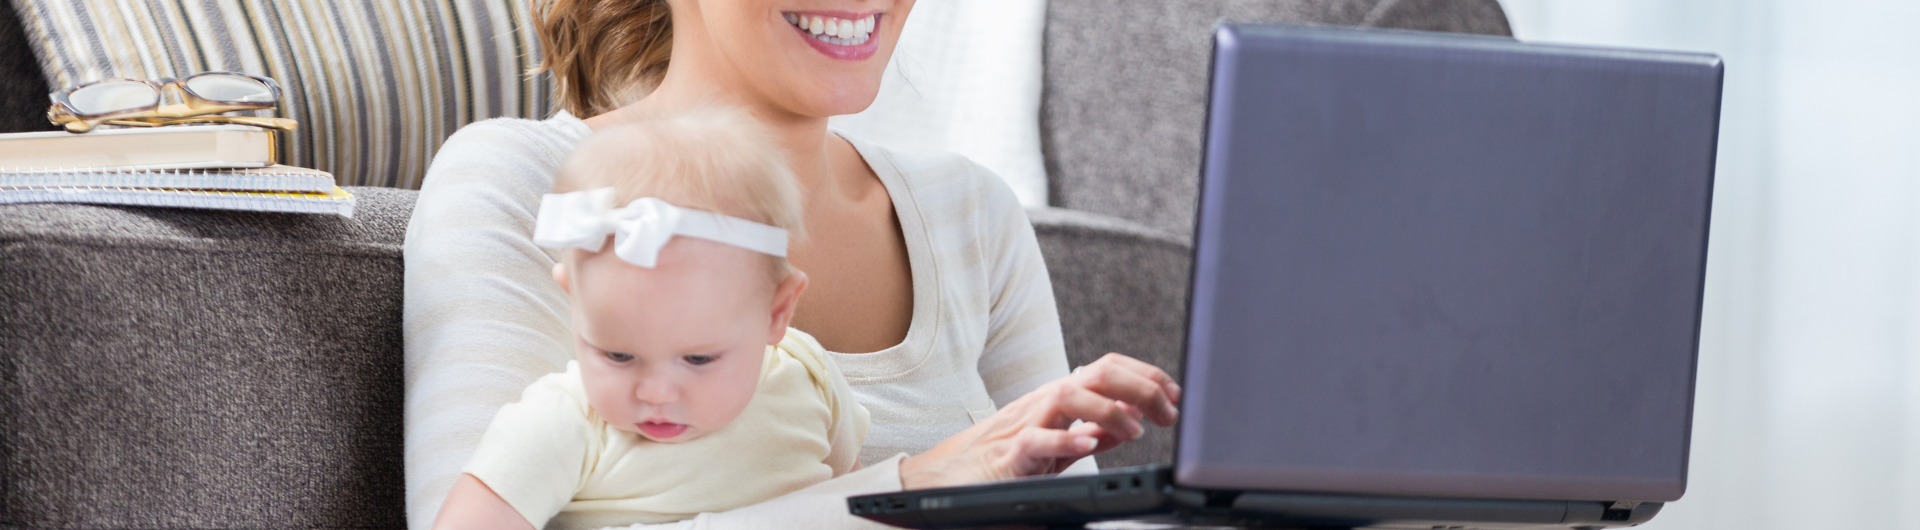 Internet Marketing For Stay At Home Mom